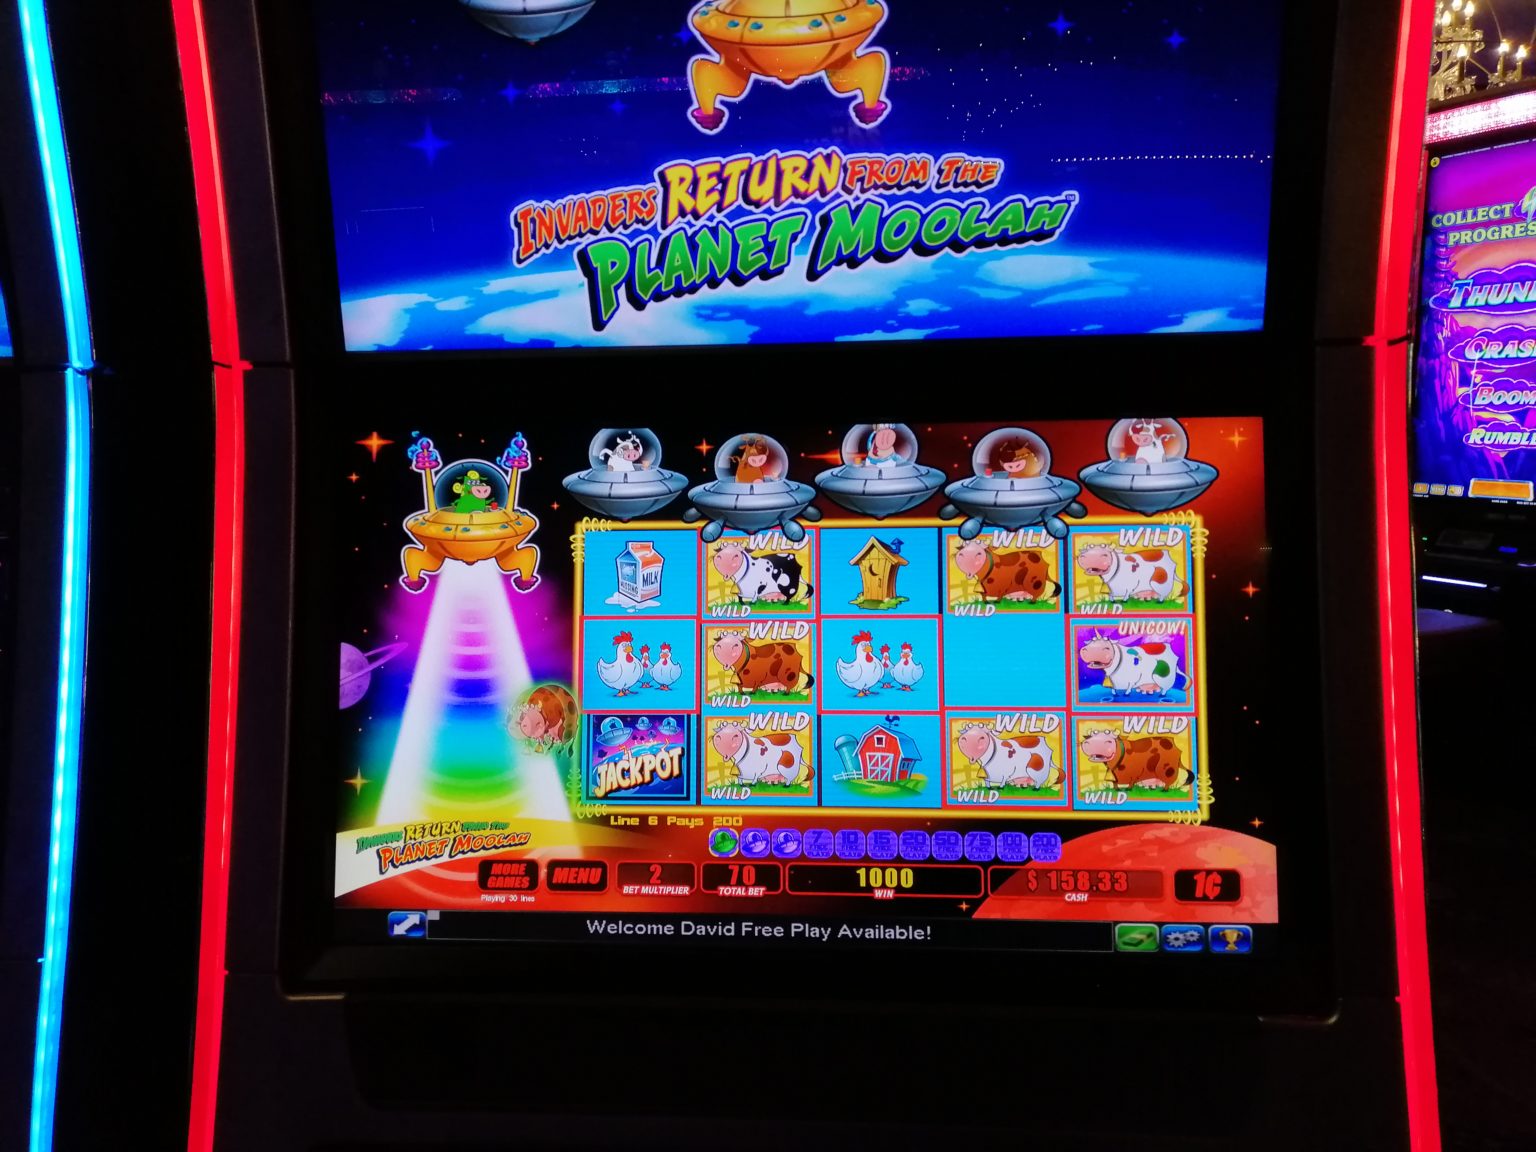 invaders from planet moolah slot machine